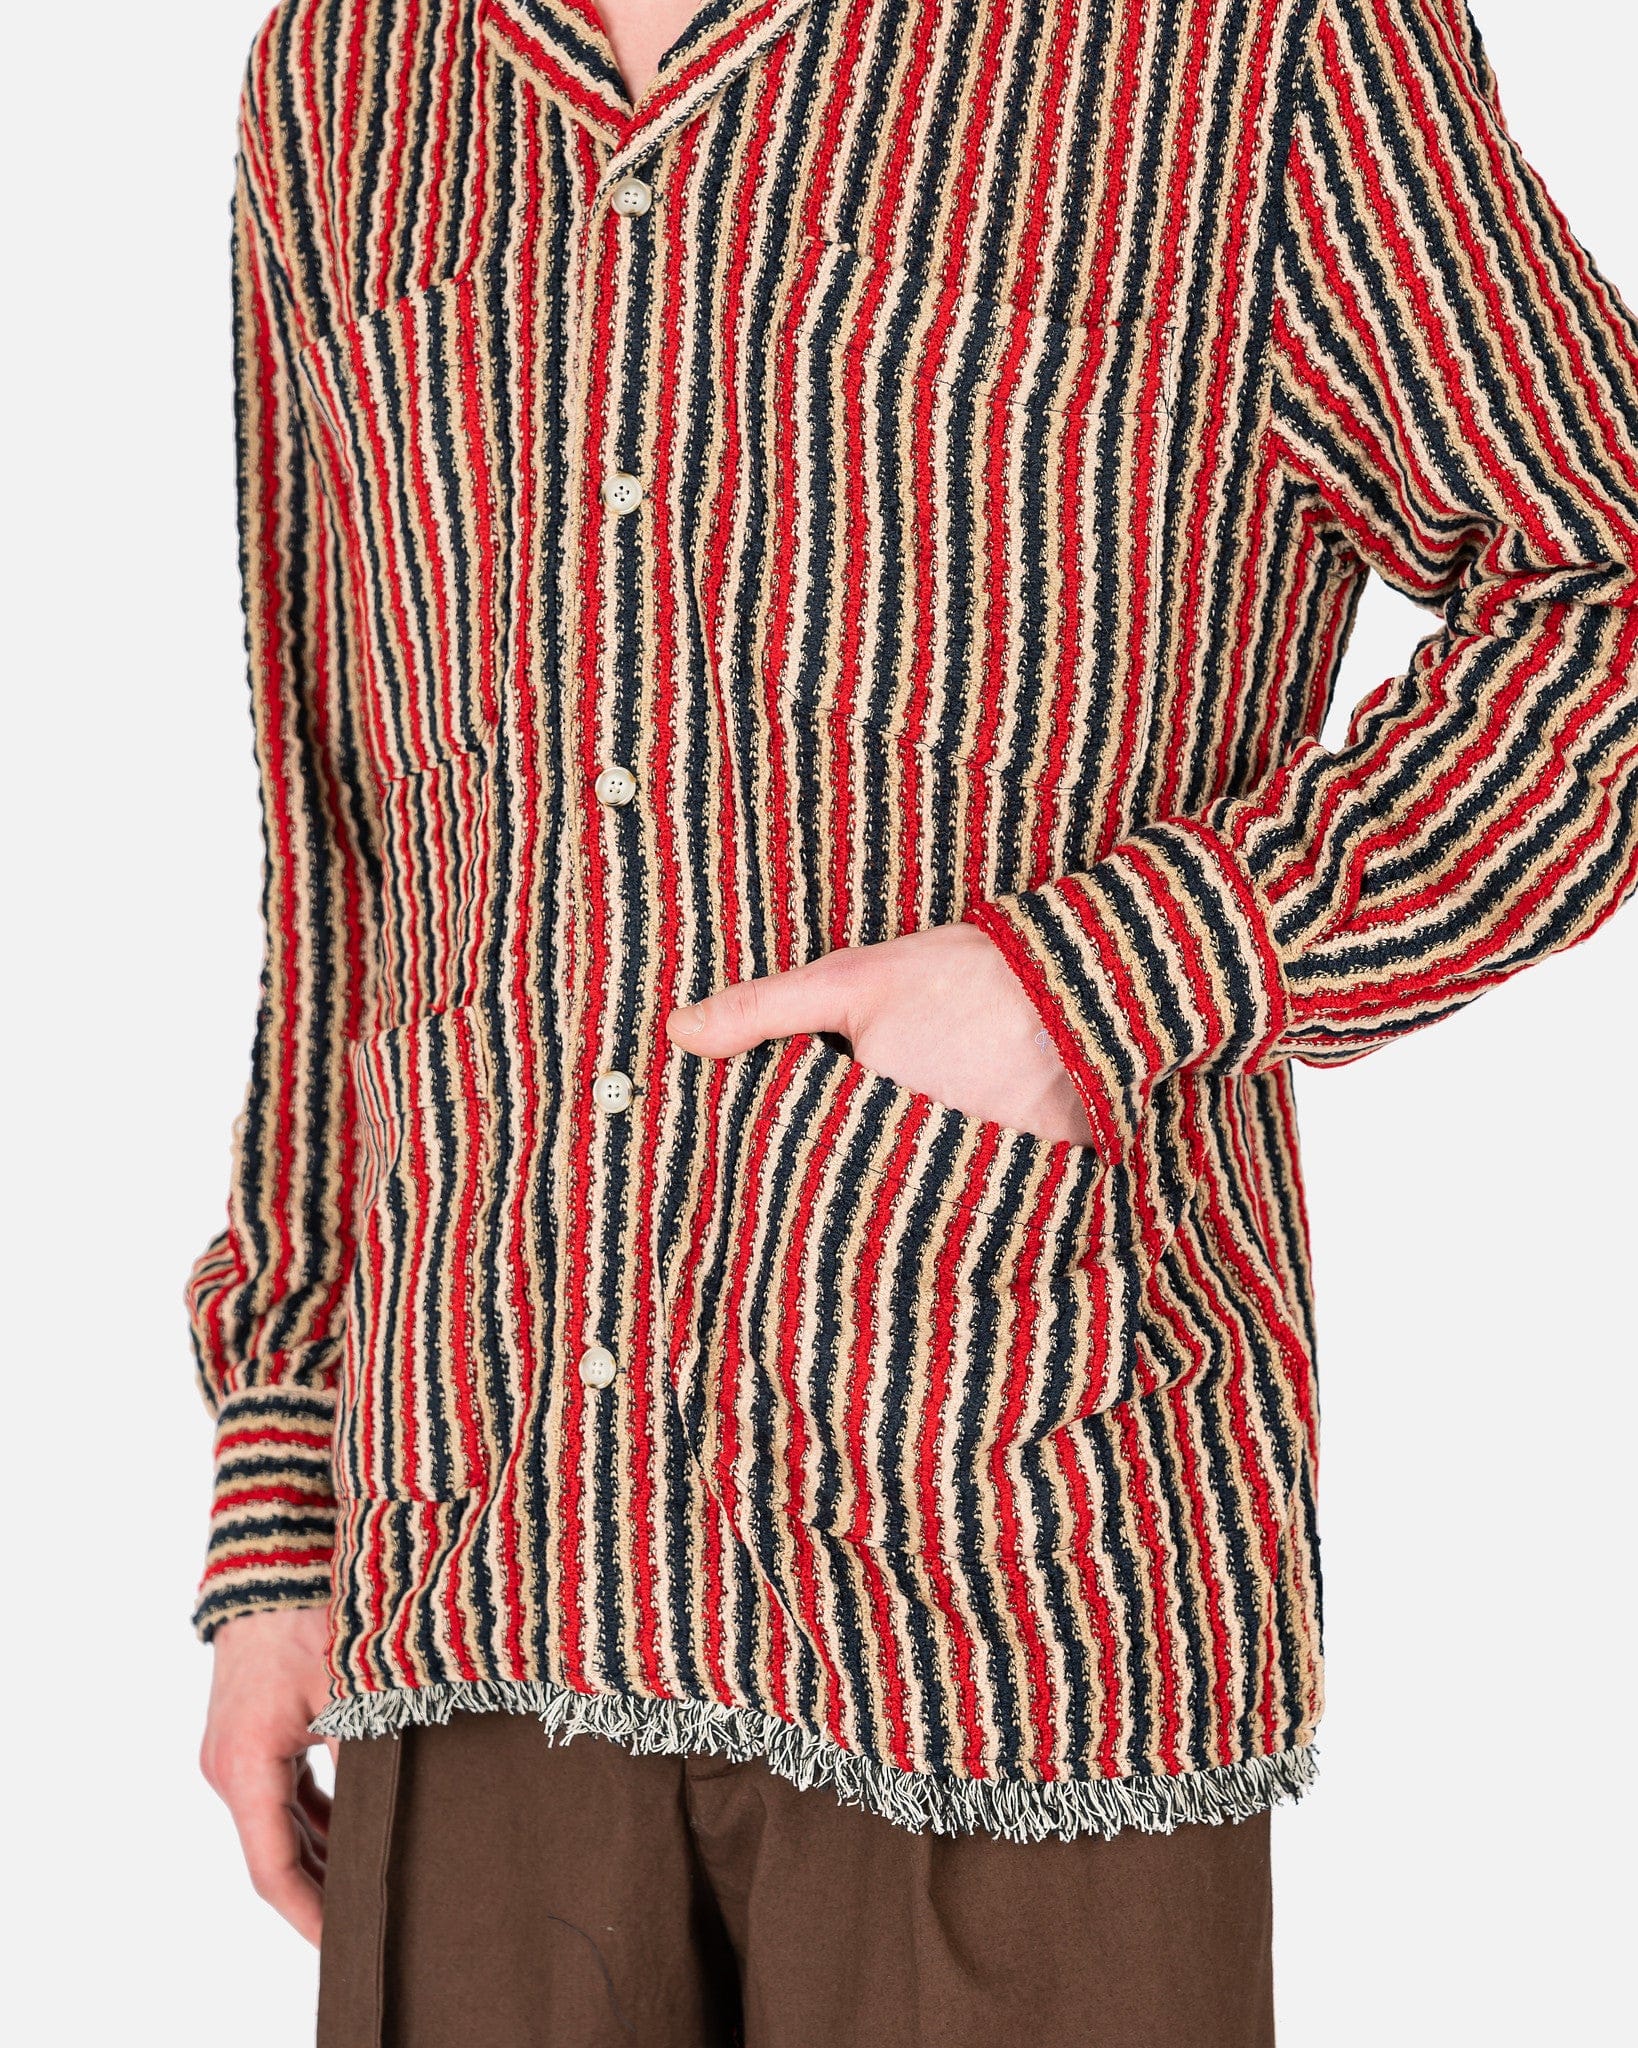 Andersson Bell Men's Shirts Stripe Open Collar Shirt in Red